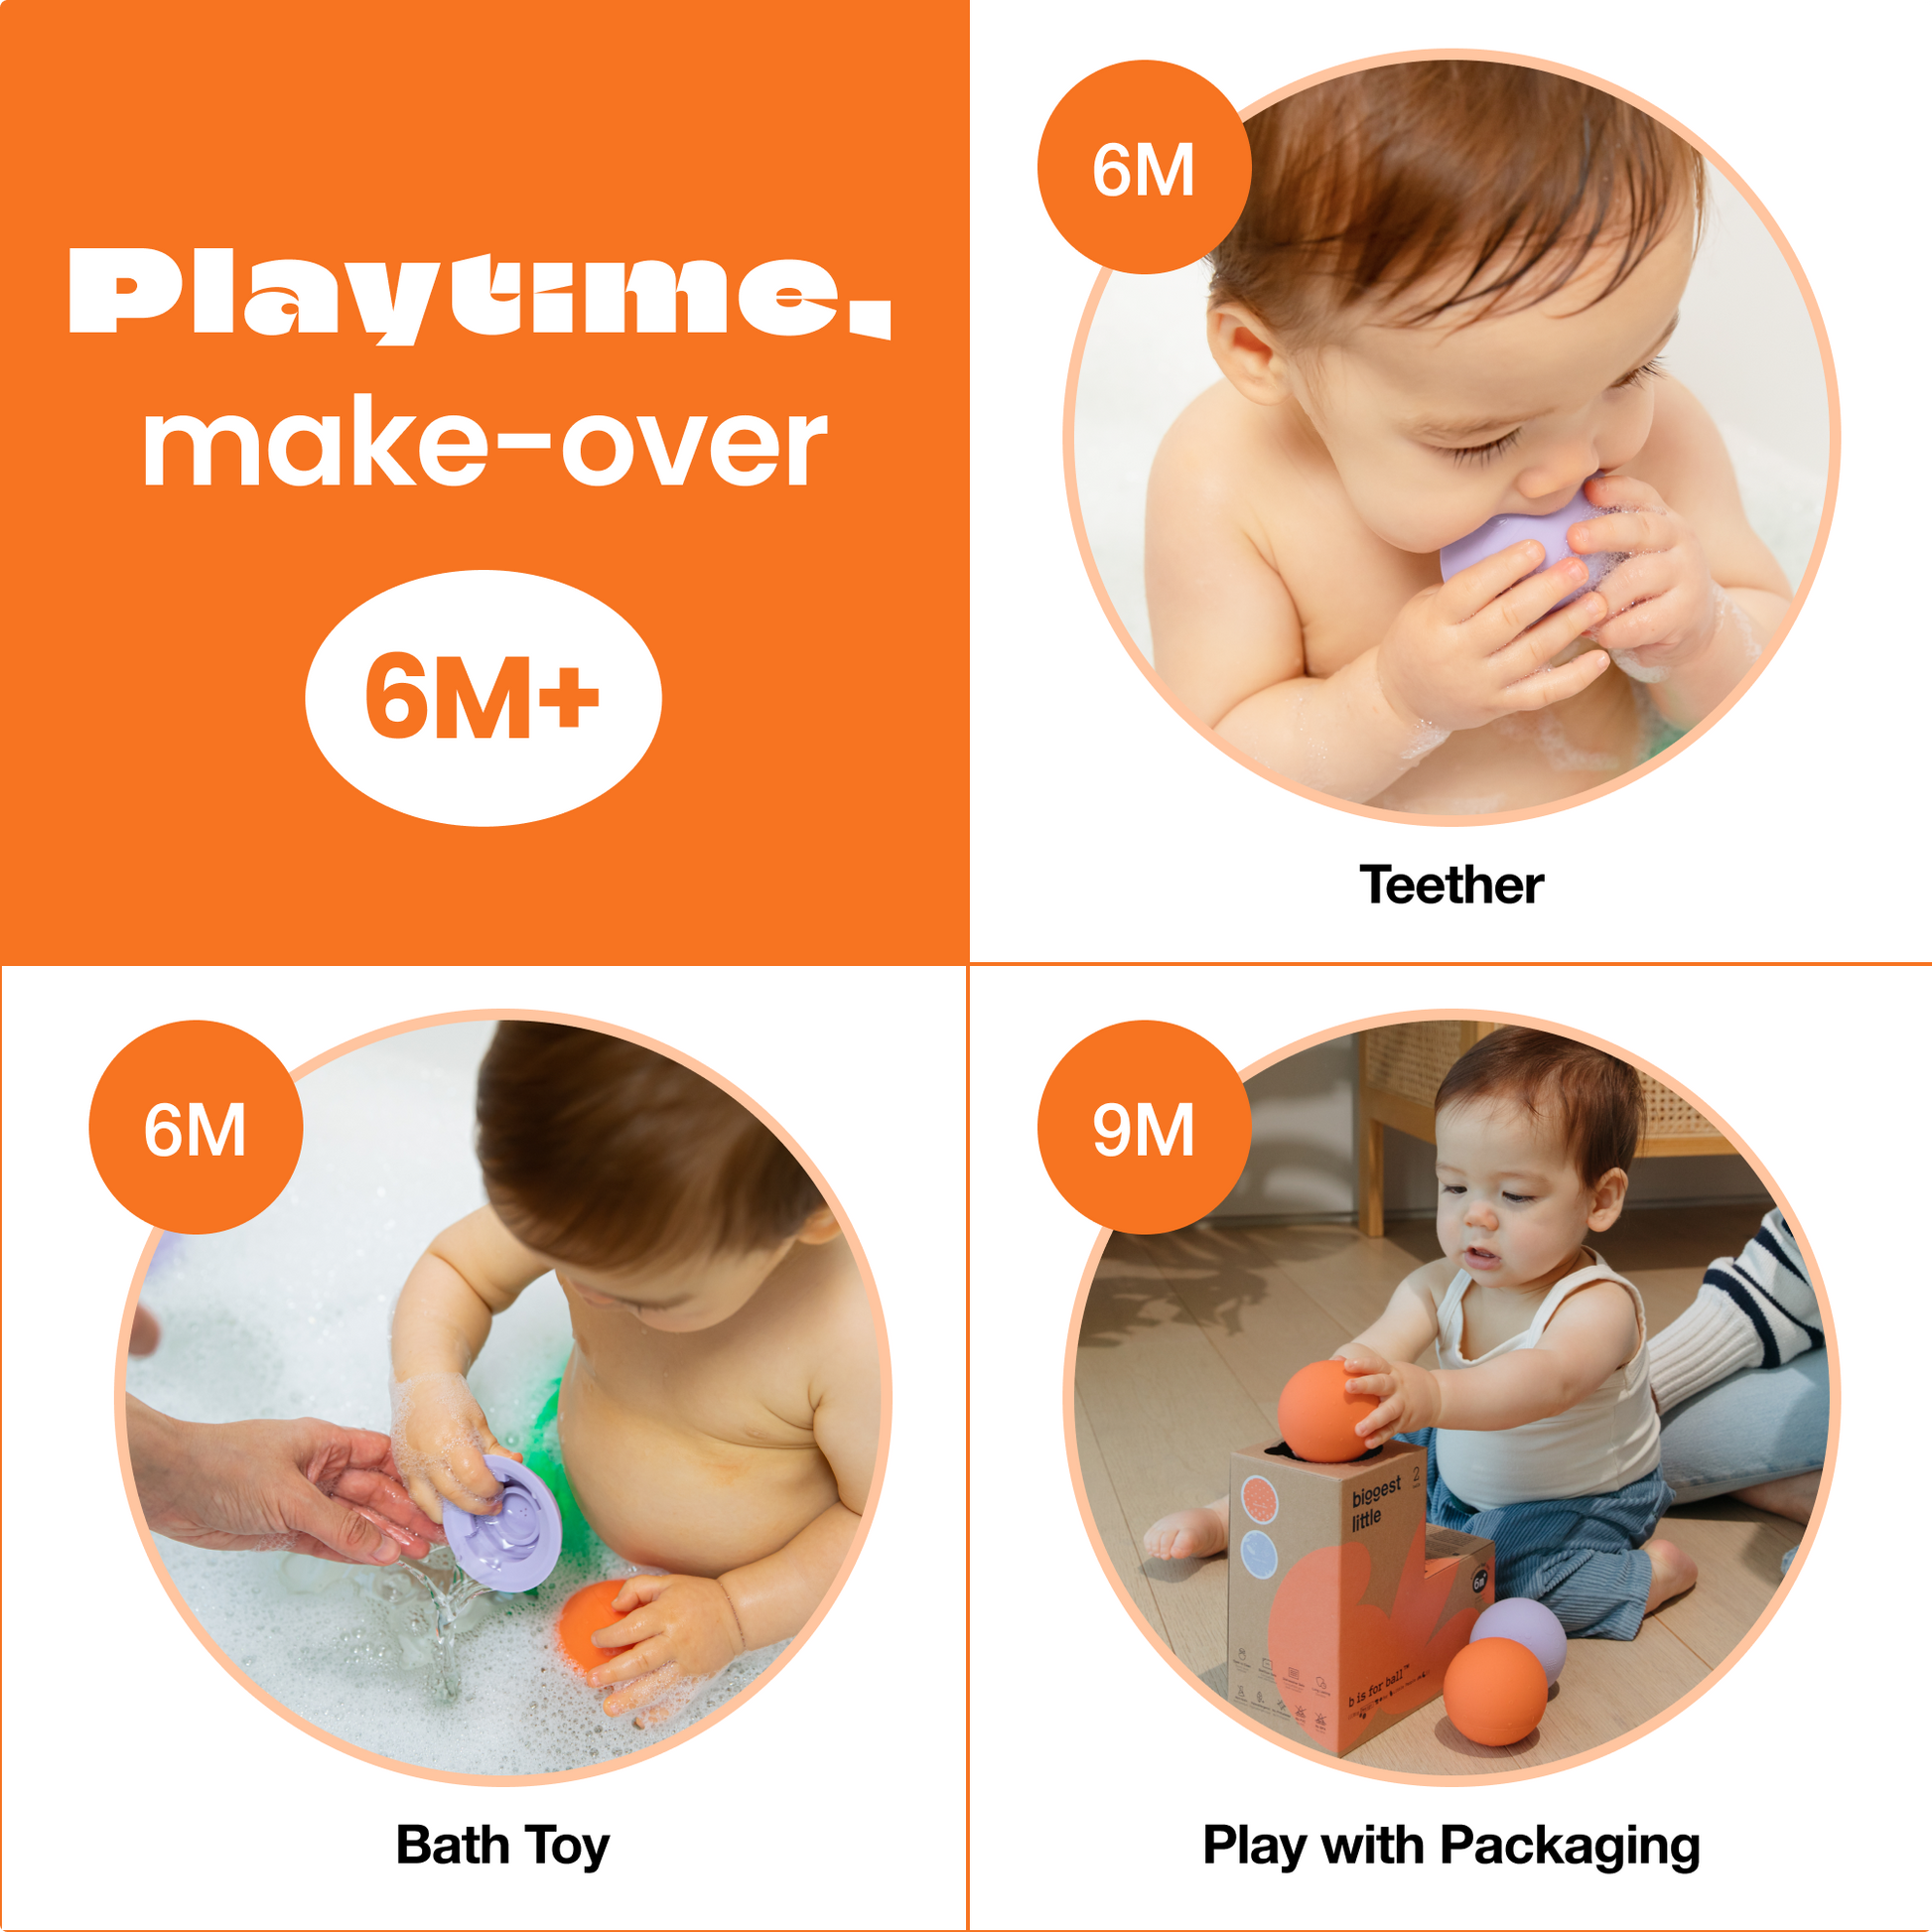 Three different ways to use the detachable toy ball: as a teether, bath toy, or paired with its L-shaped packaging